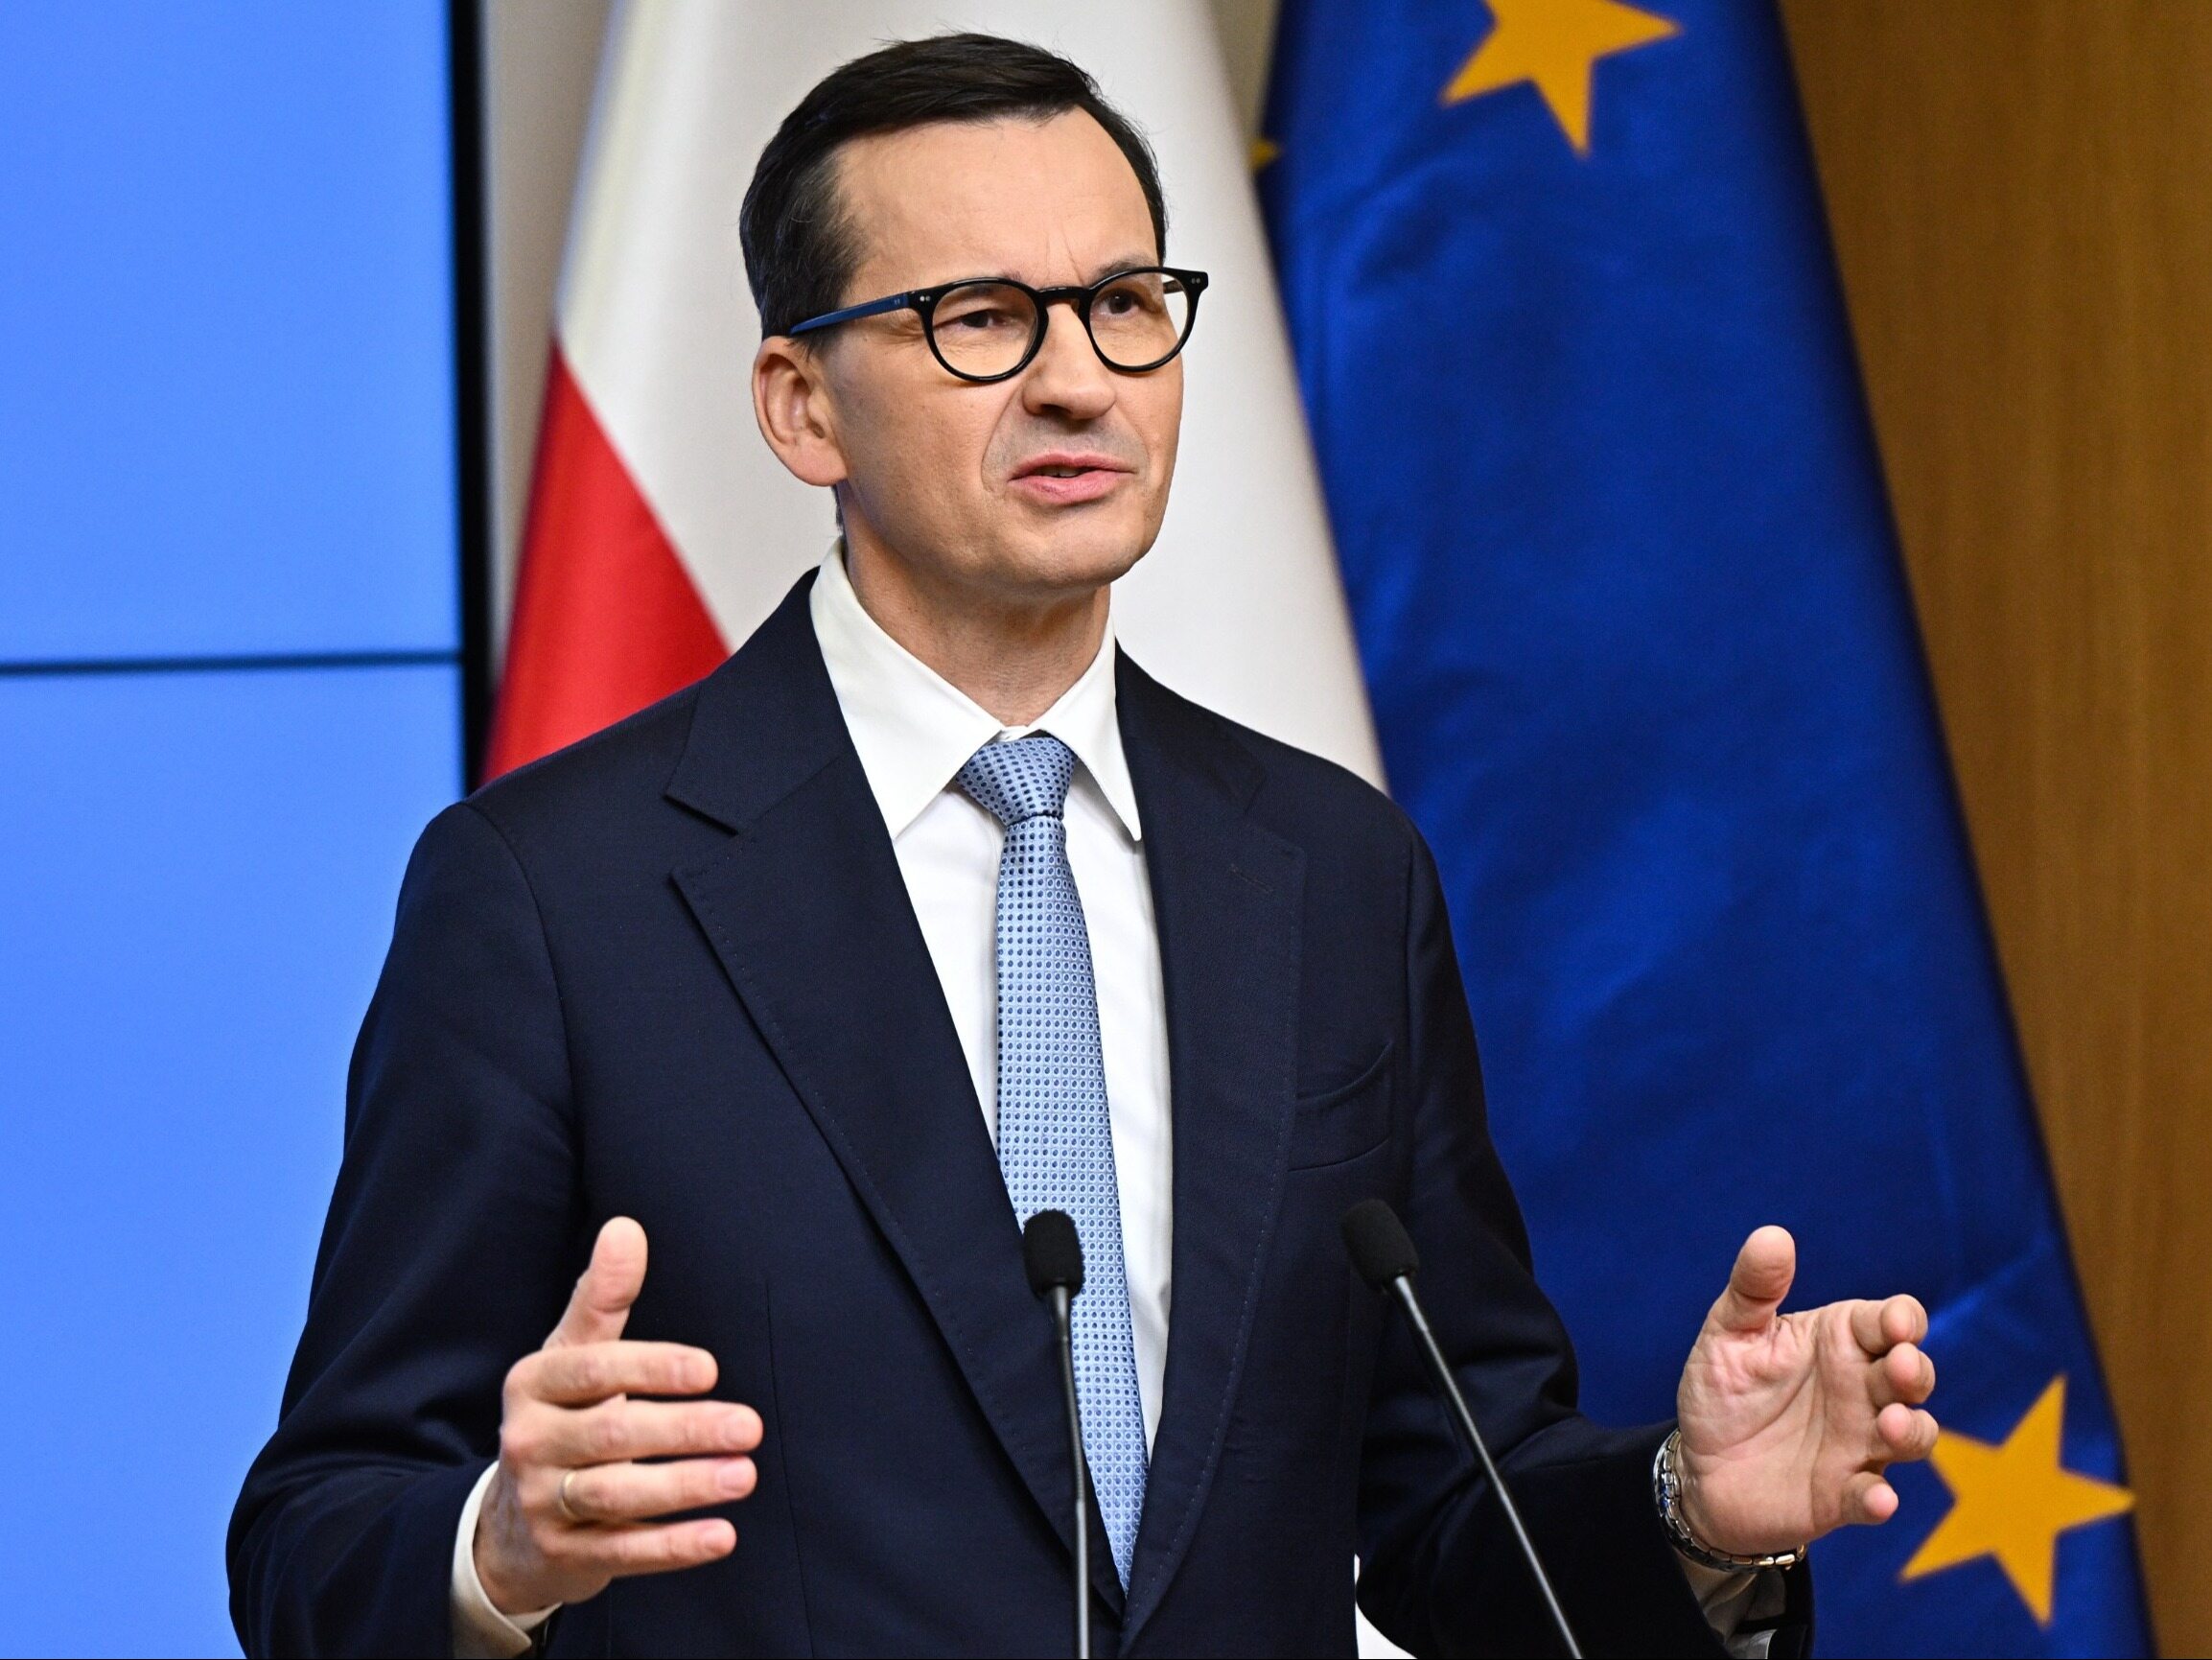 Morawiecki criticized the EU procedure in Brussels.  "It will take away Poland's right to decide"